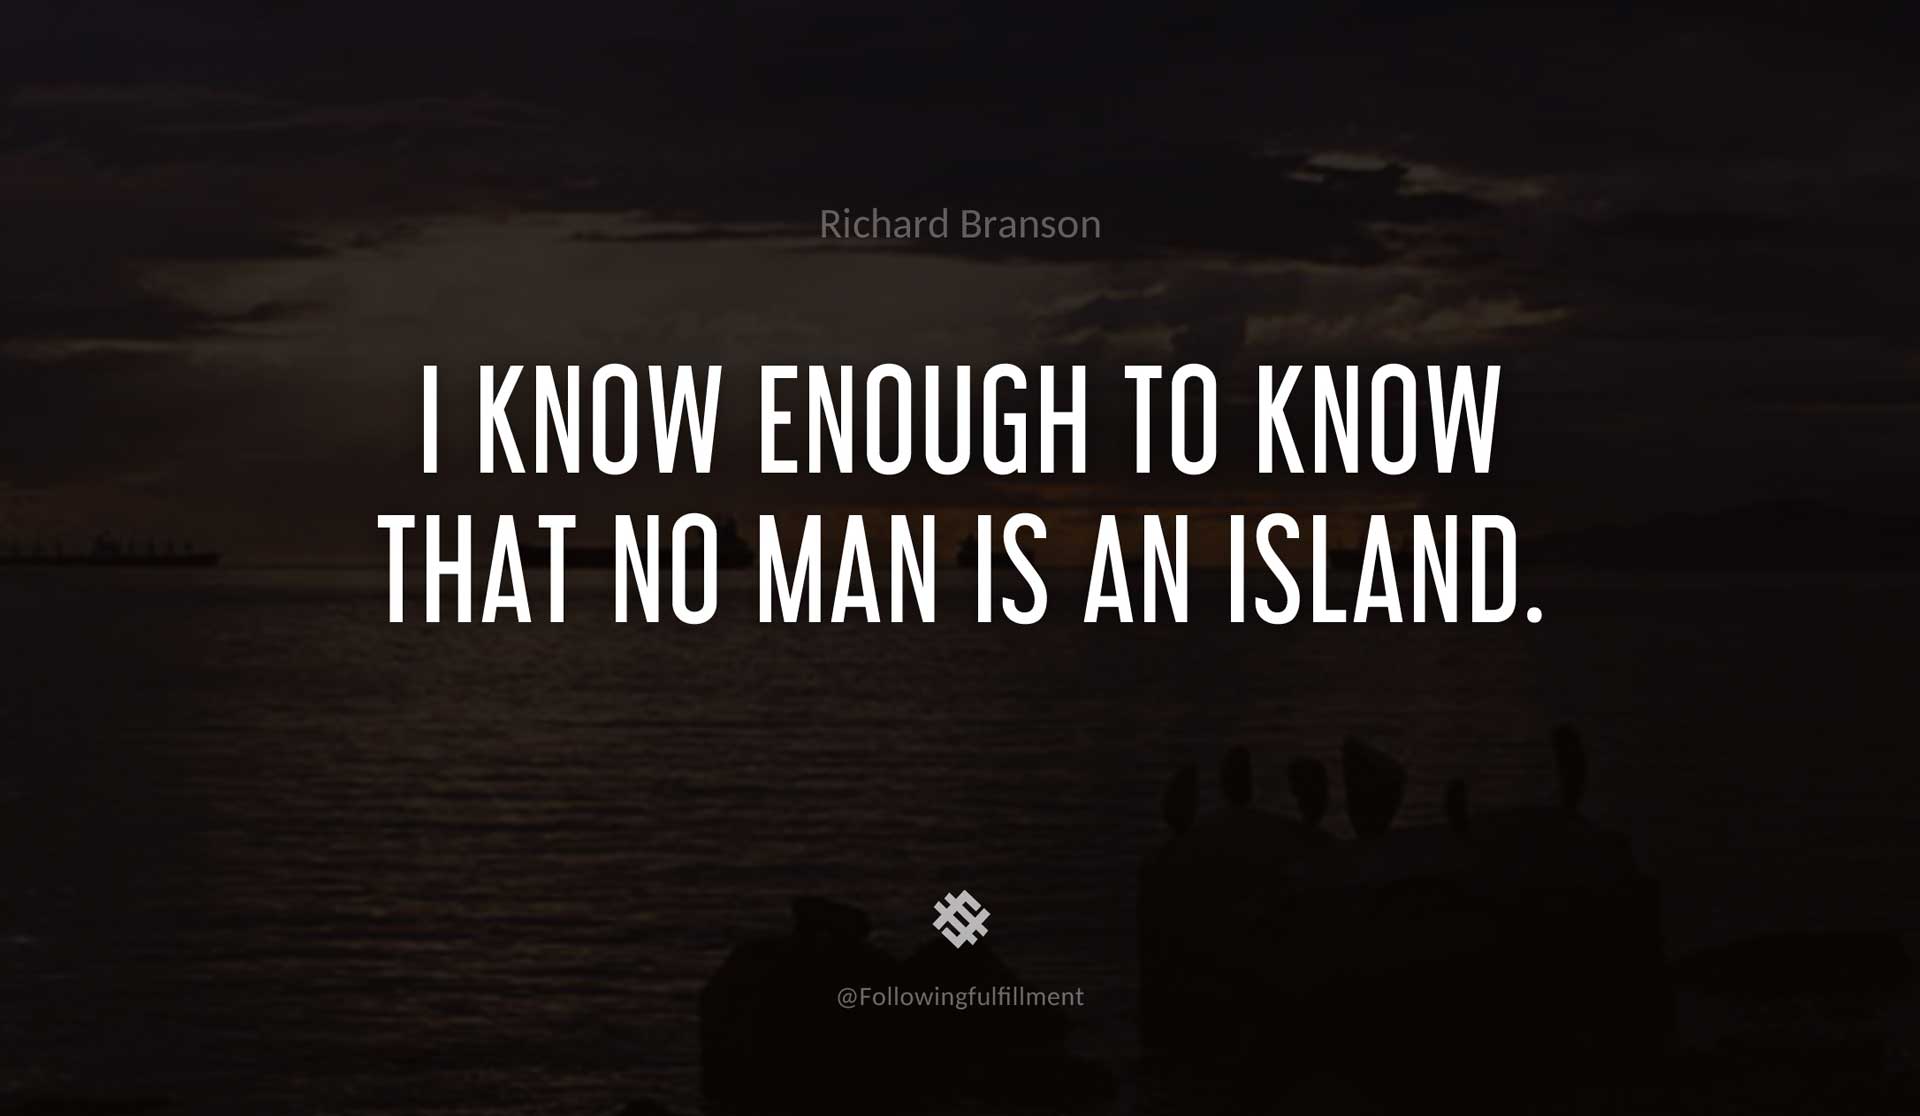 I-know-enough-to-know-that-no-man-is-an-island.-RICHARD-BRANSON-Quote.jpg